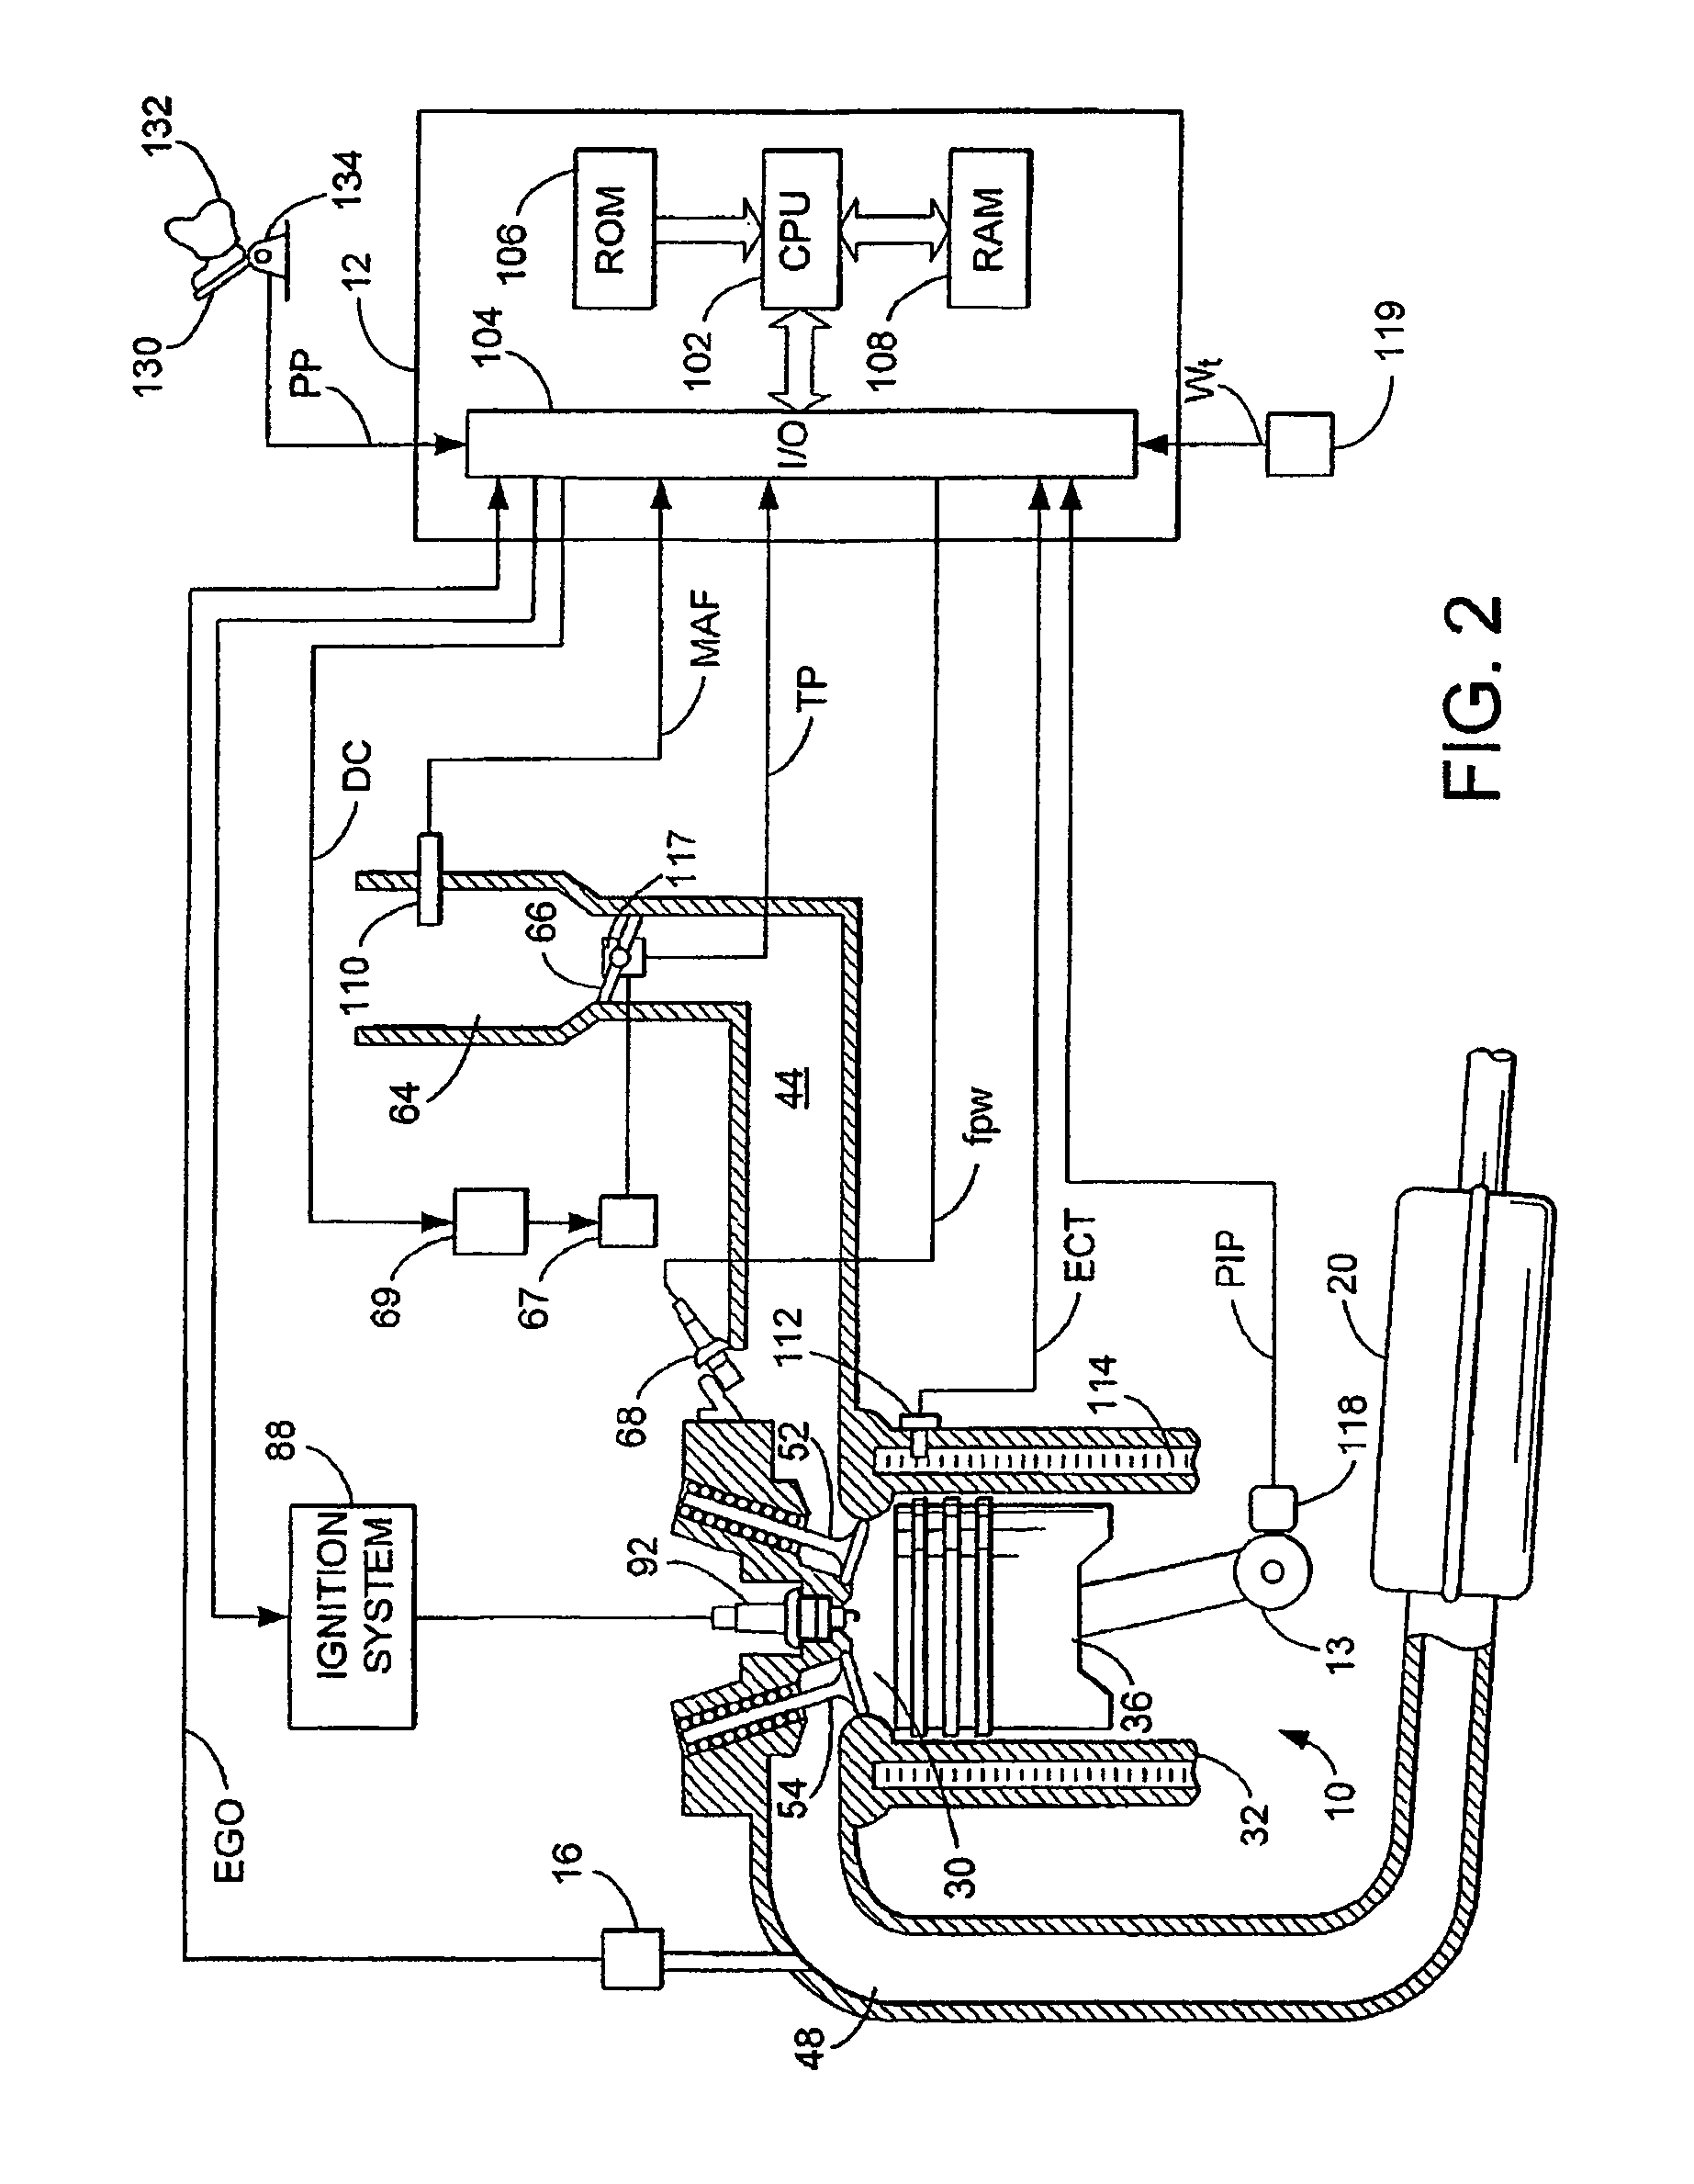 Traction control system and method